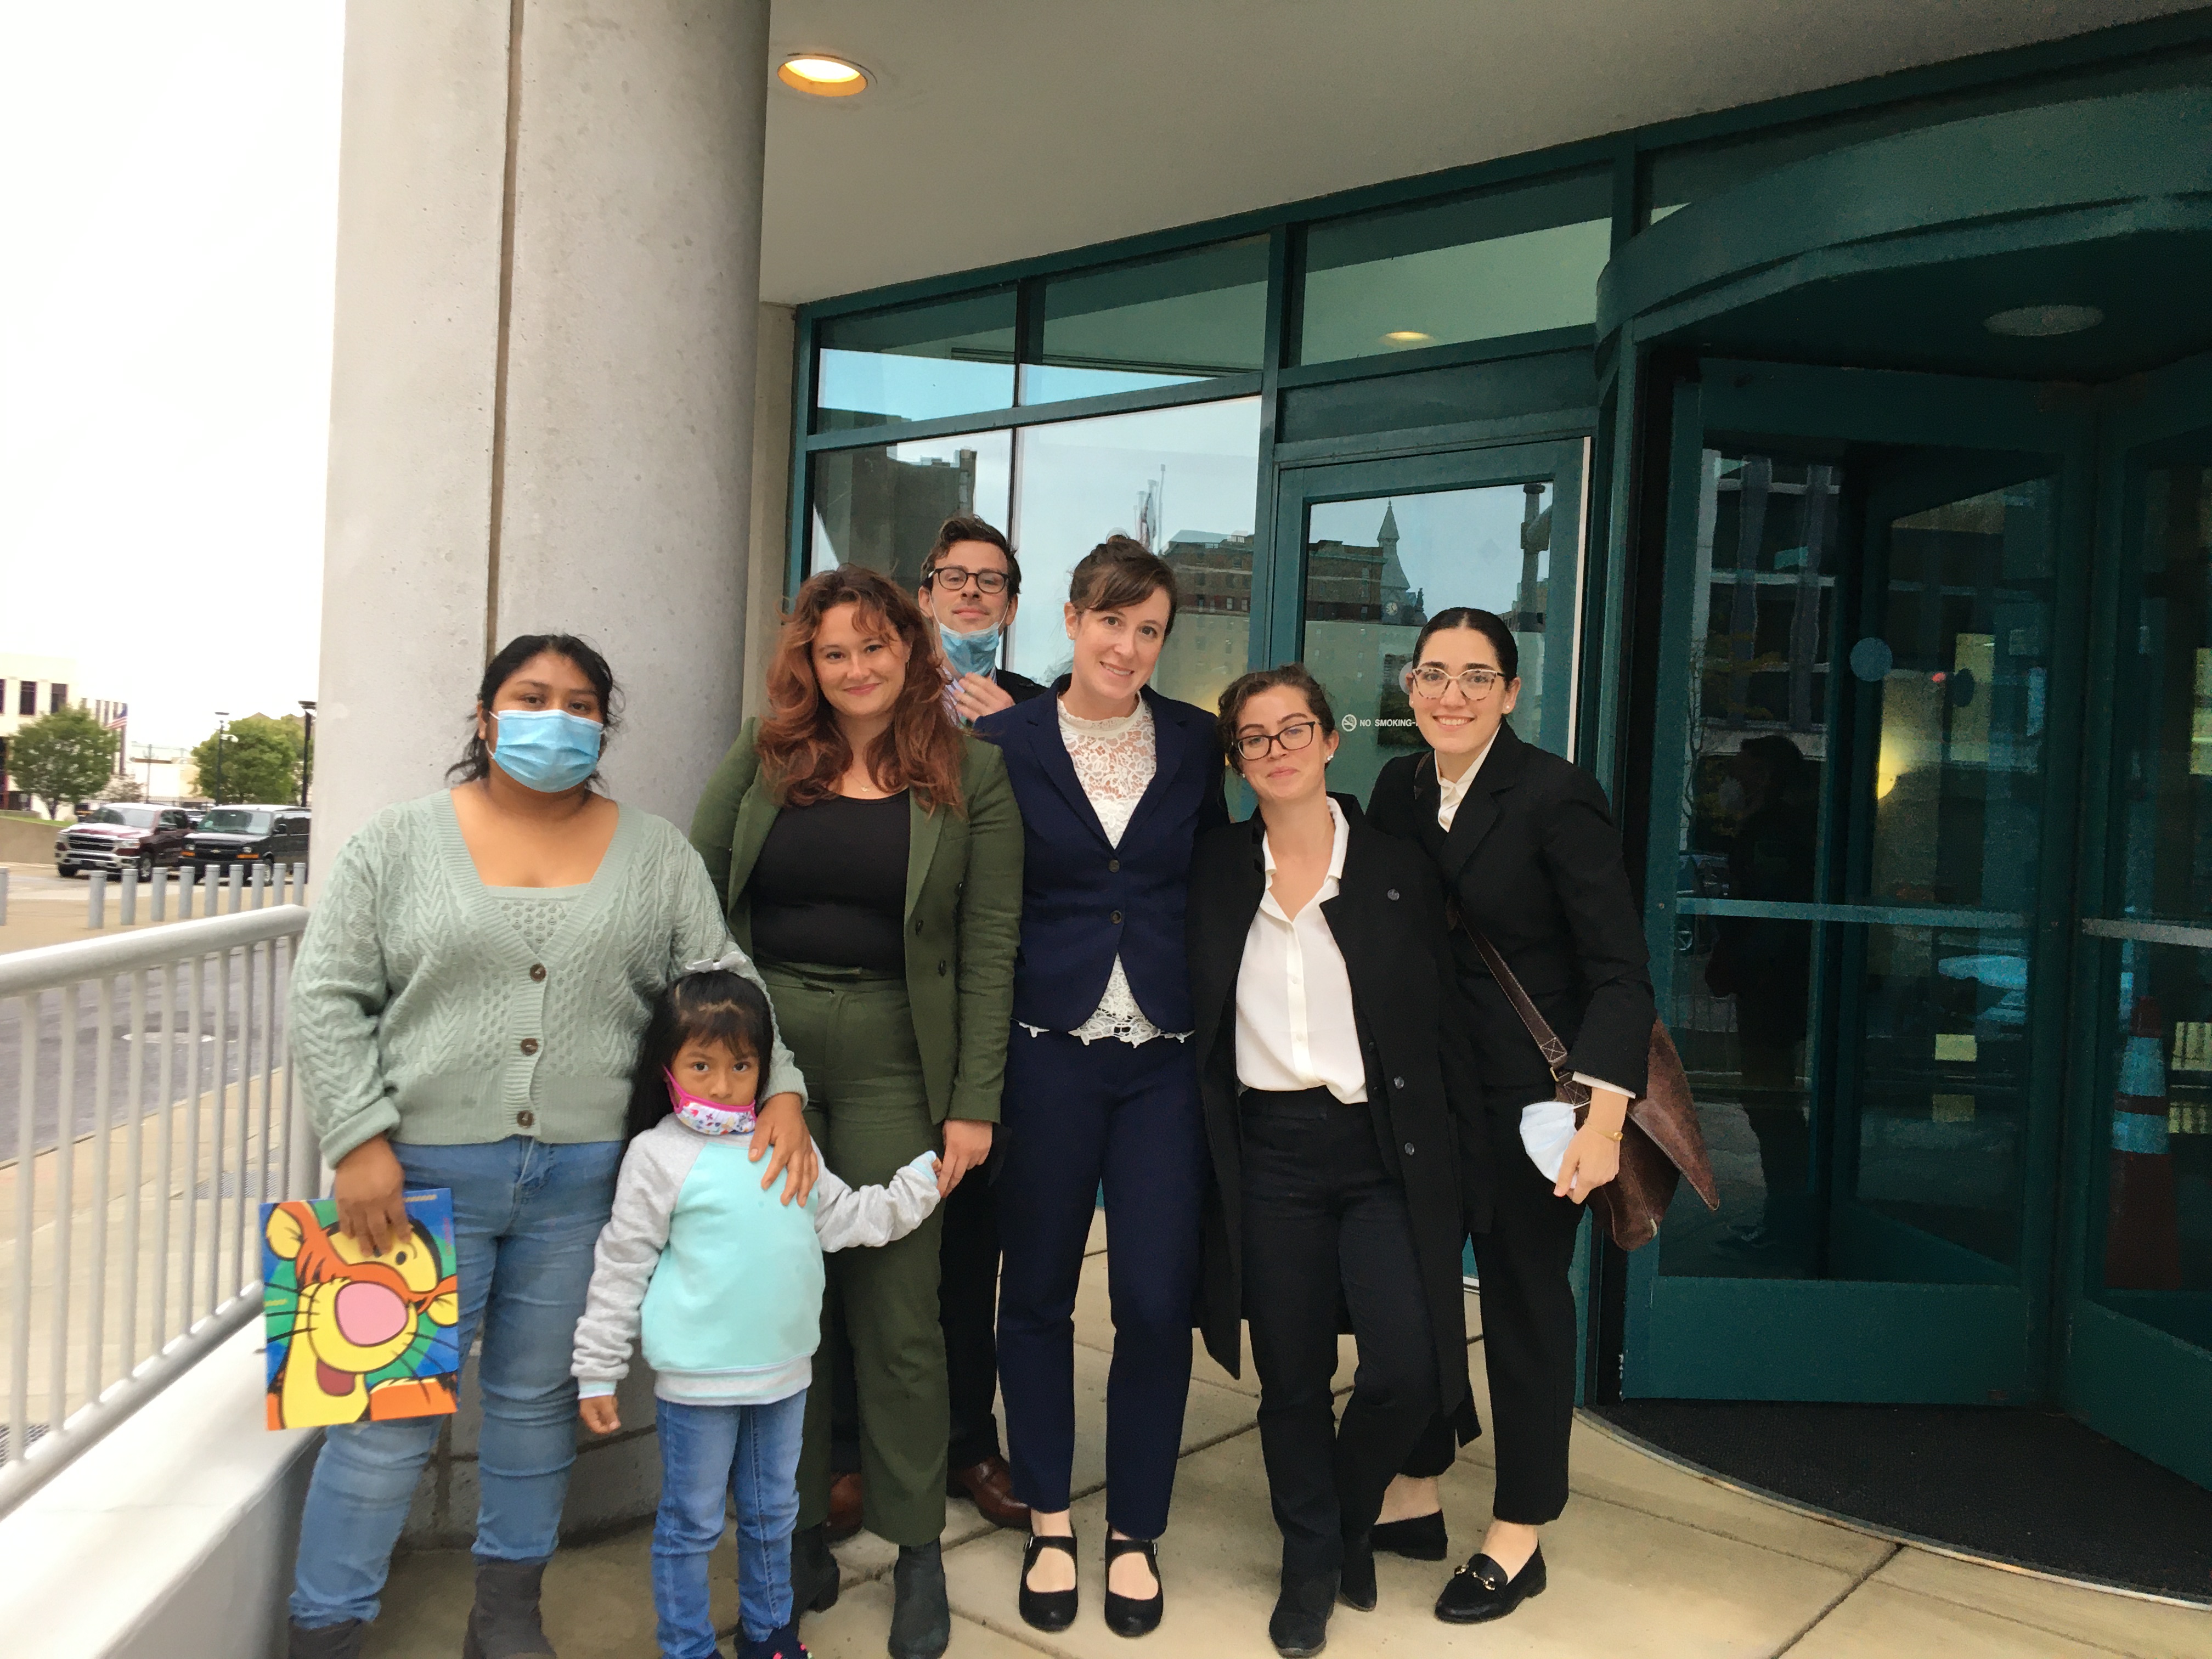 Photo of several members of the legal team standing with their client and their two small children, outside in front of a building's entrance.